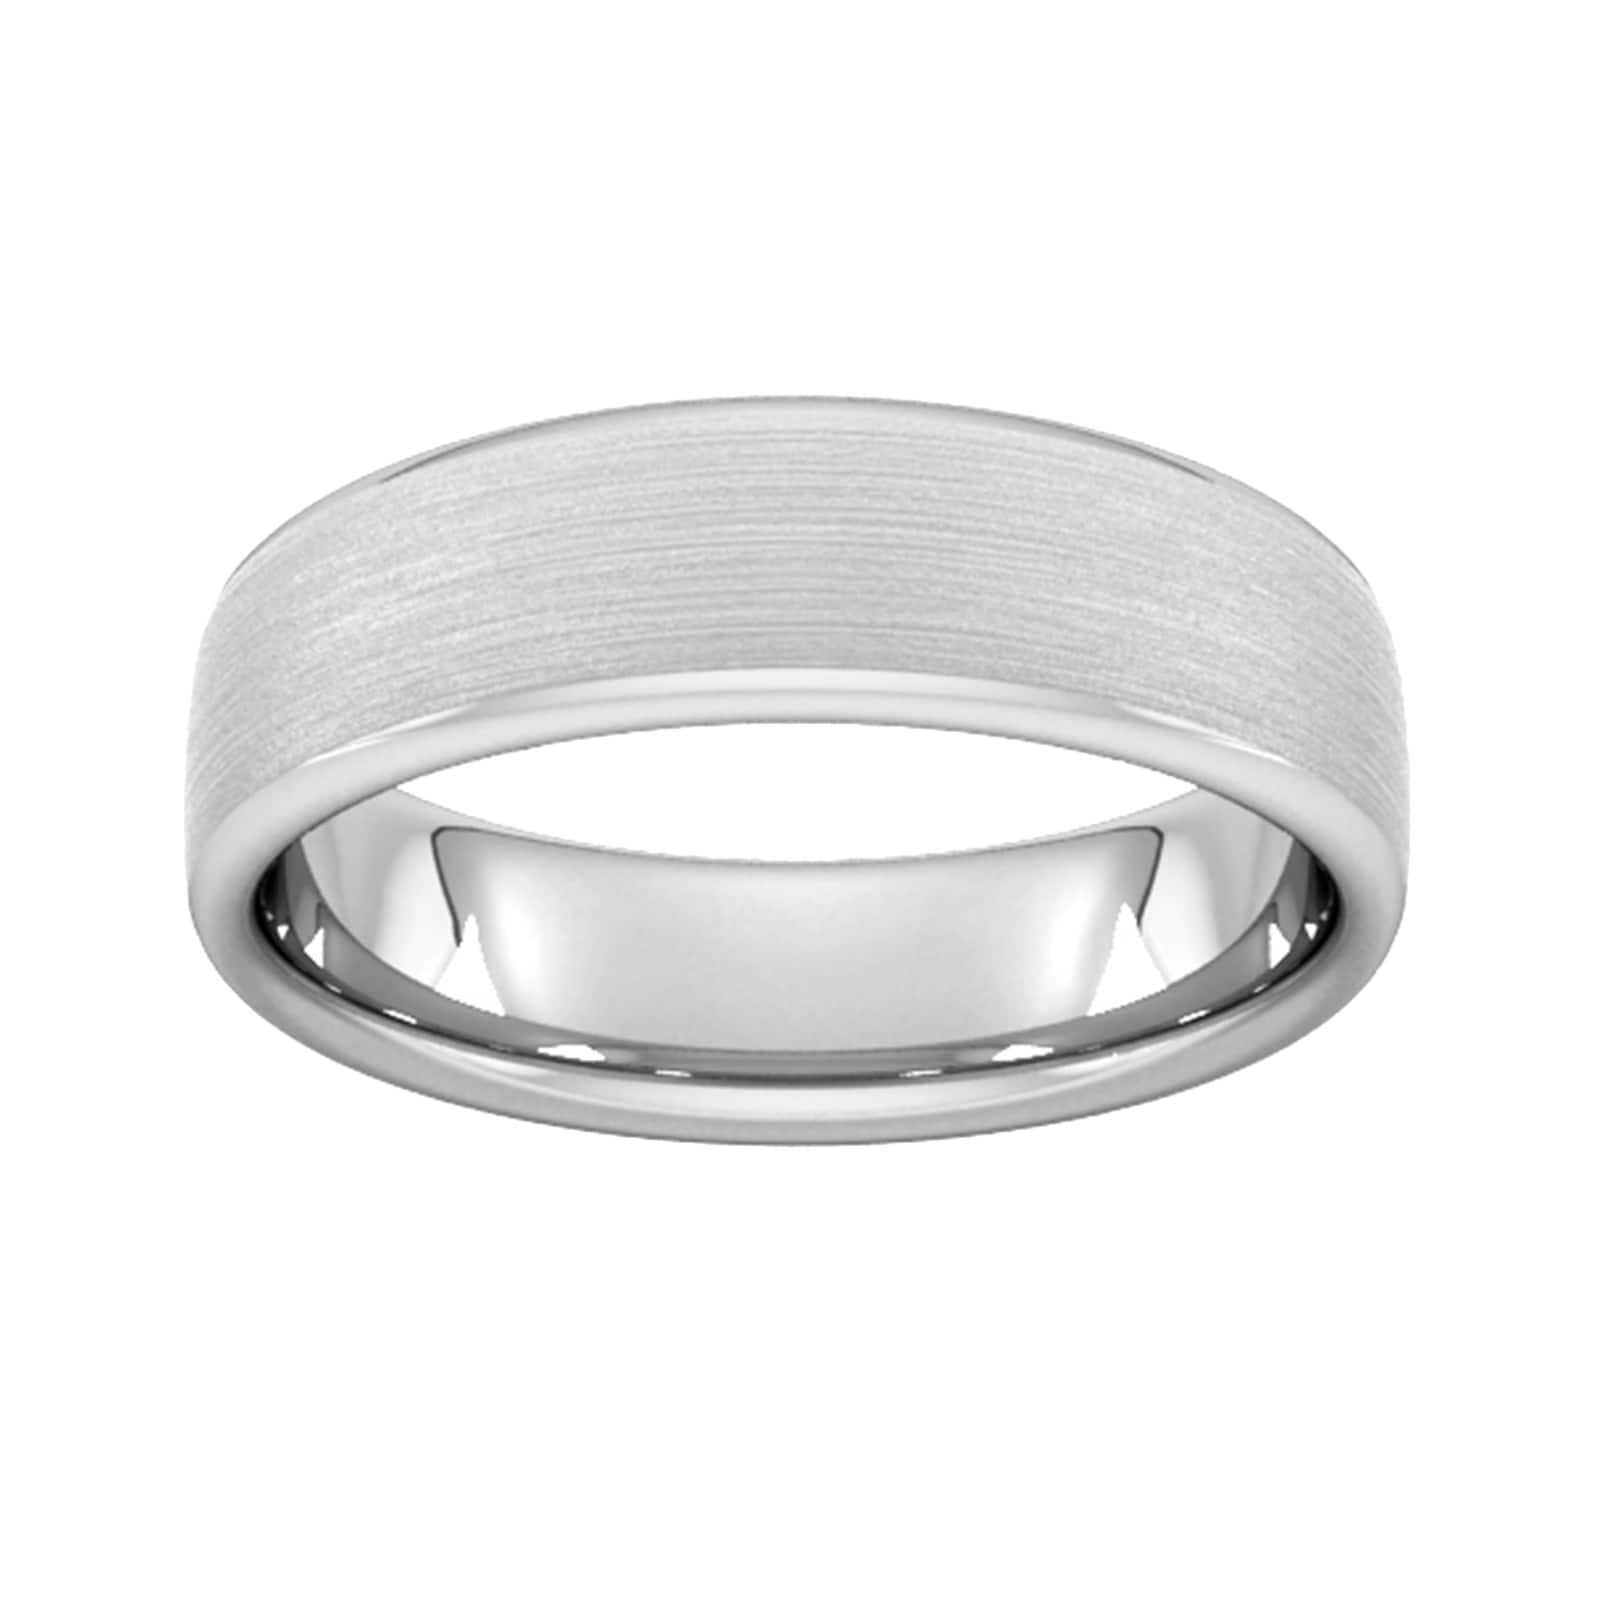 6mm Flat Court Heavy Matt Finished Wedding Ring In 18 Carat White Gold - Ring Size S